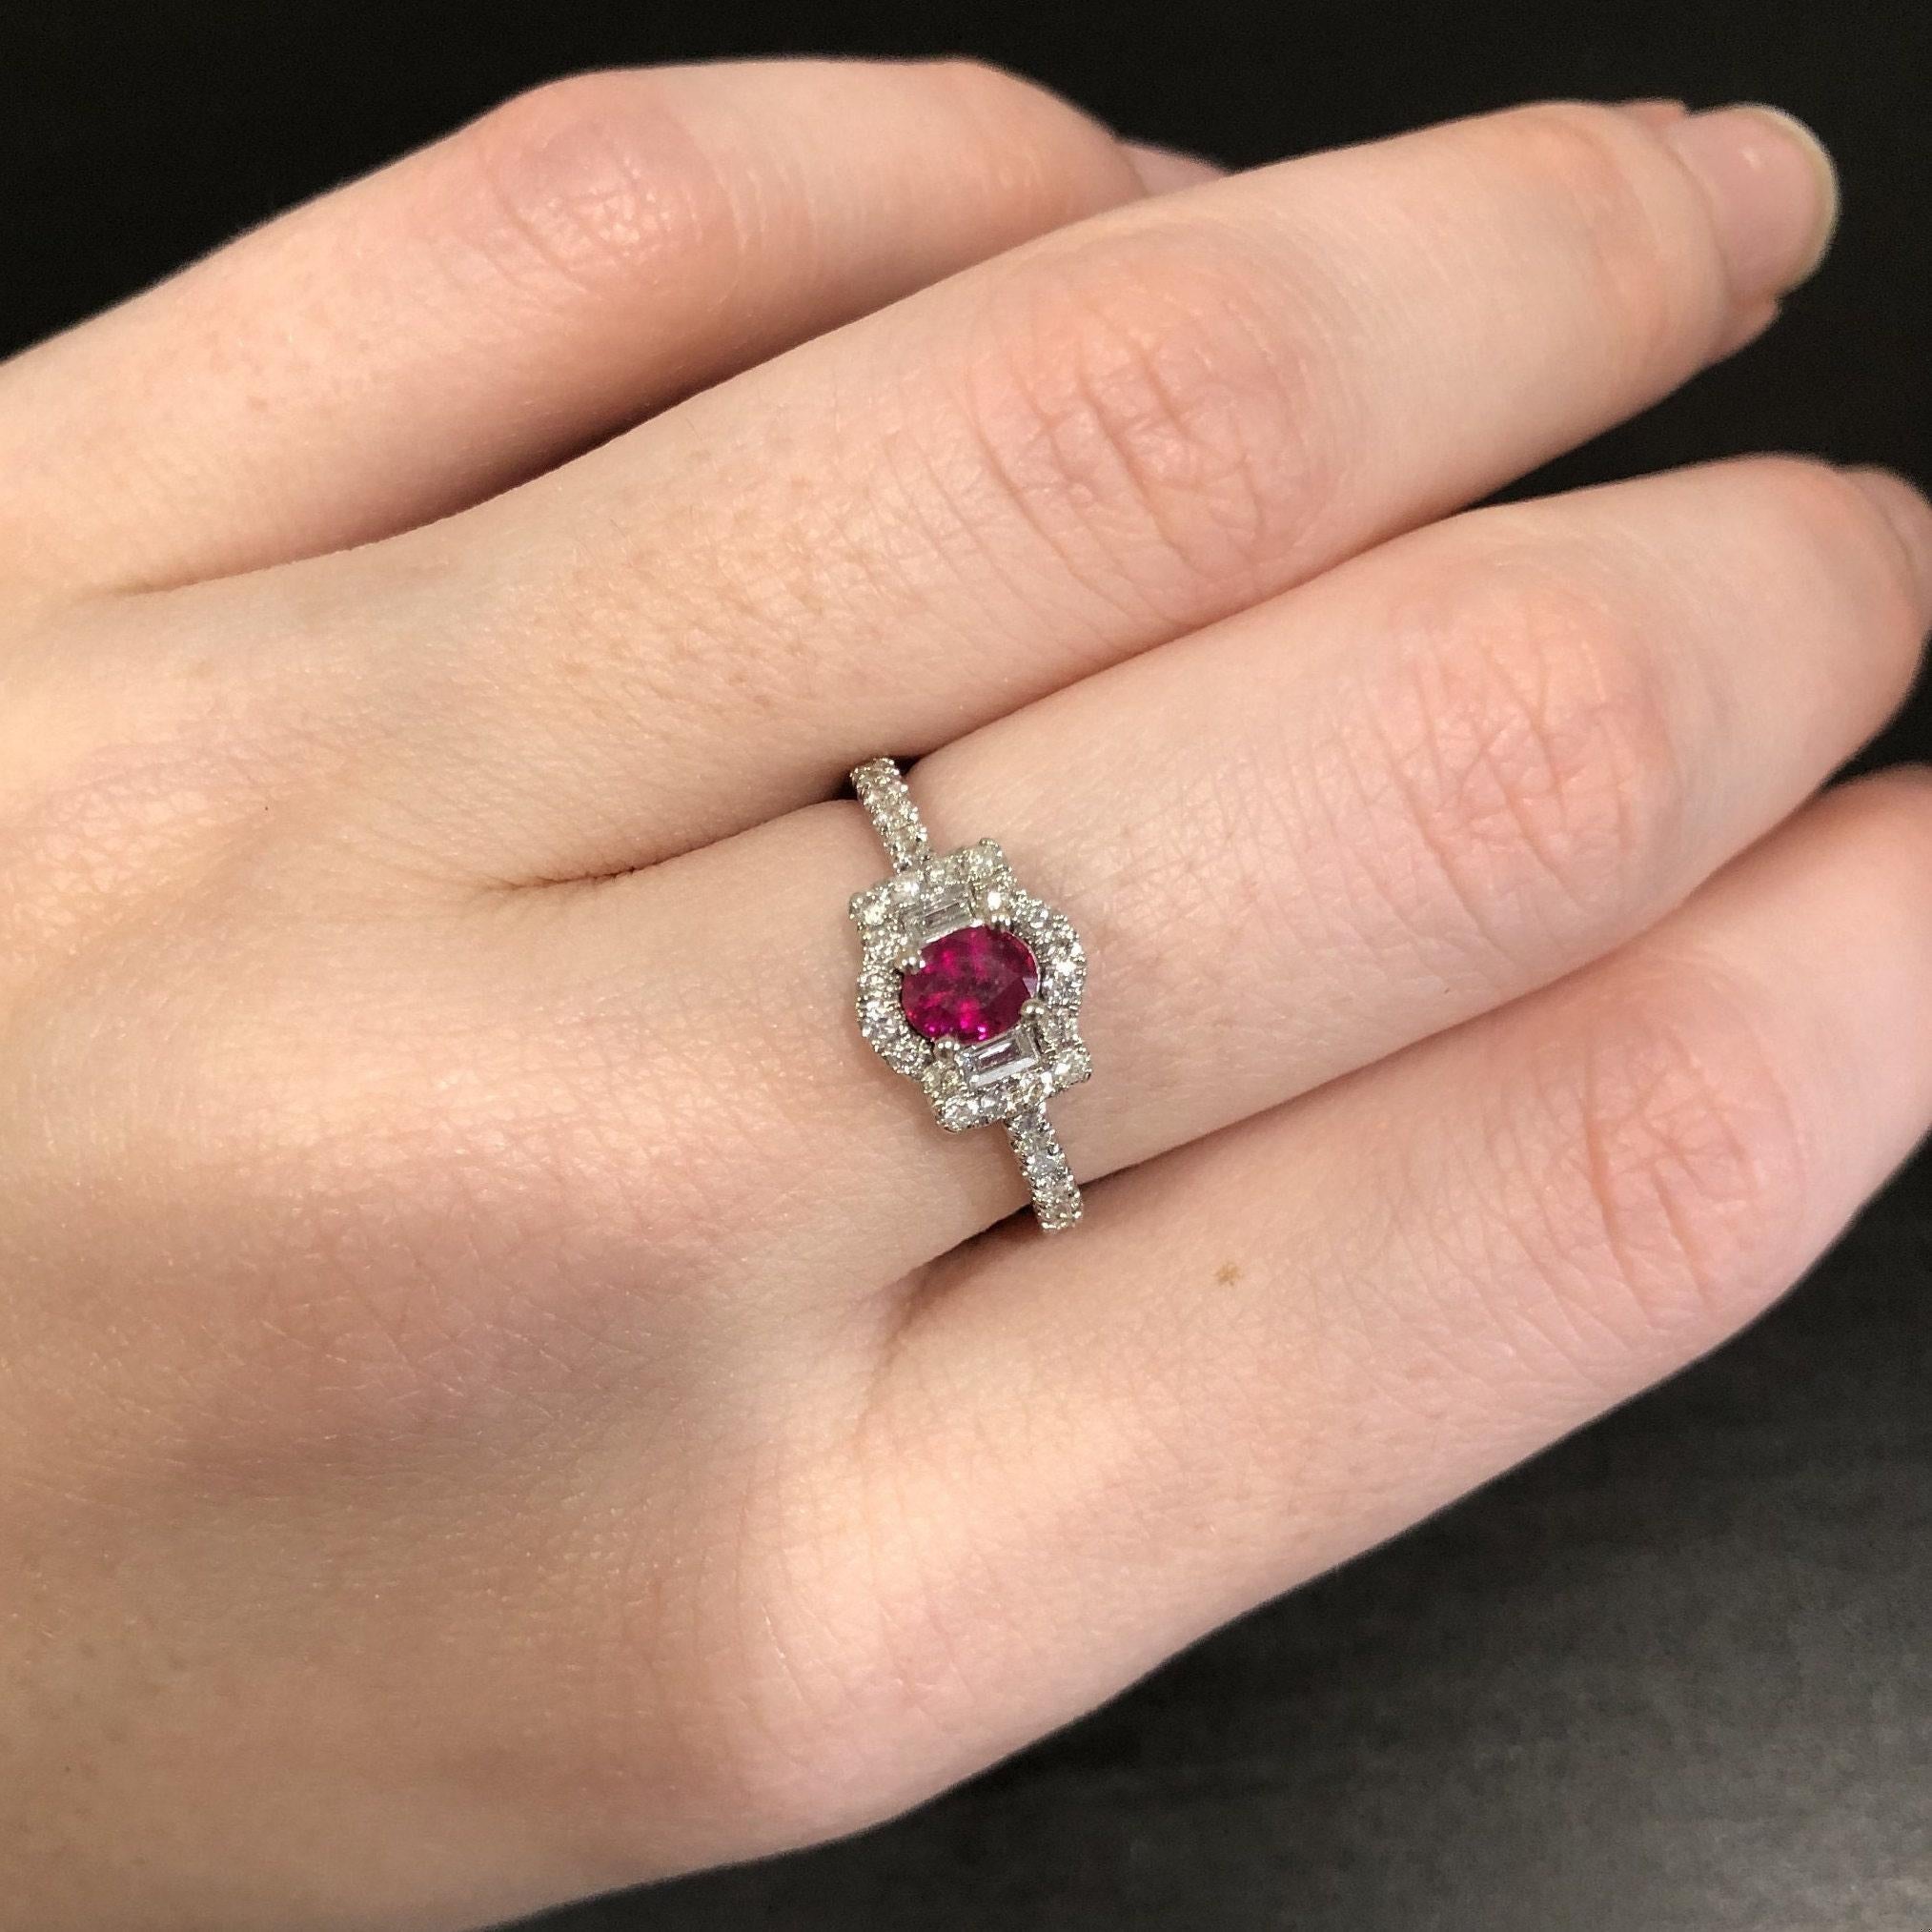 Women's 2.7ct Mozambique Ruby Ring w Earth Mined Diamonds in Solid 14k Gold Oval 5x4mm For Sale